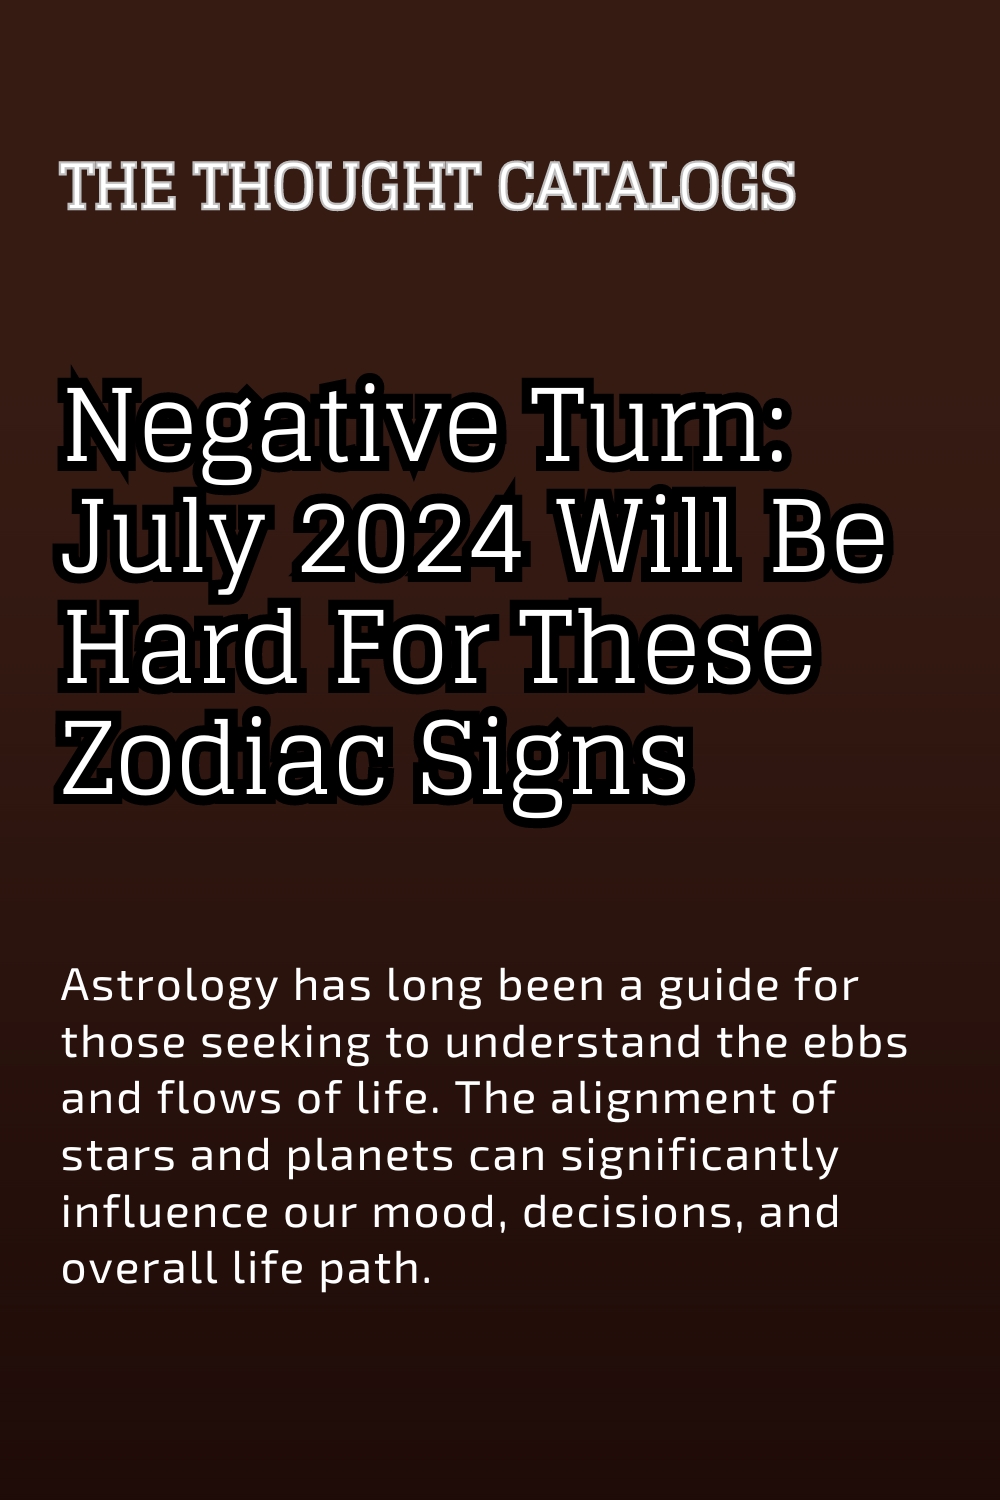 Negative Turn July 2024 Will Be Hard For These Zodiac Signs